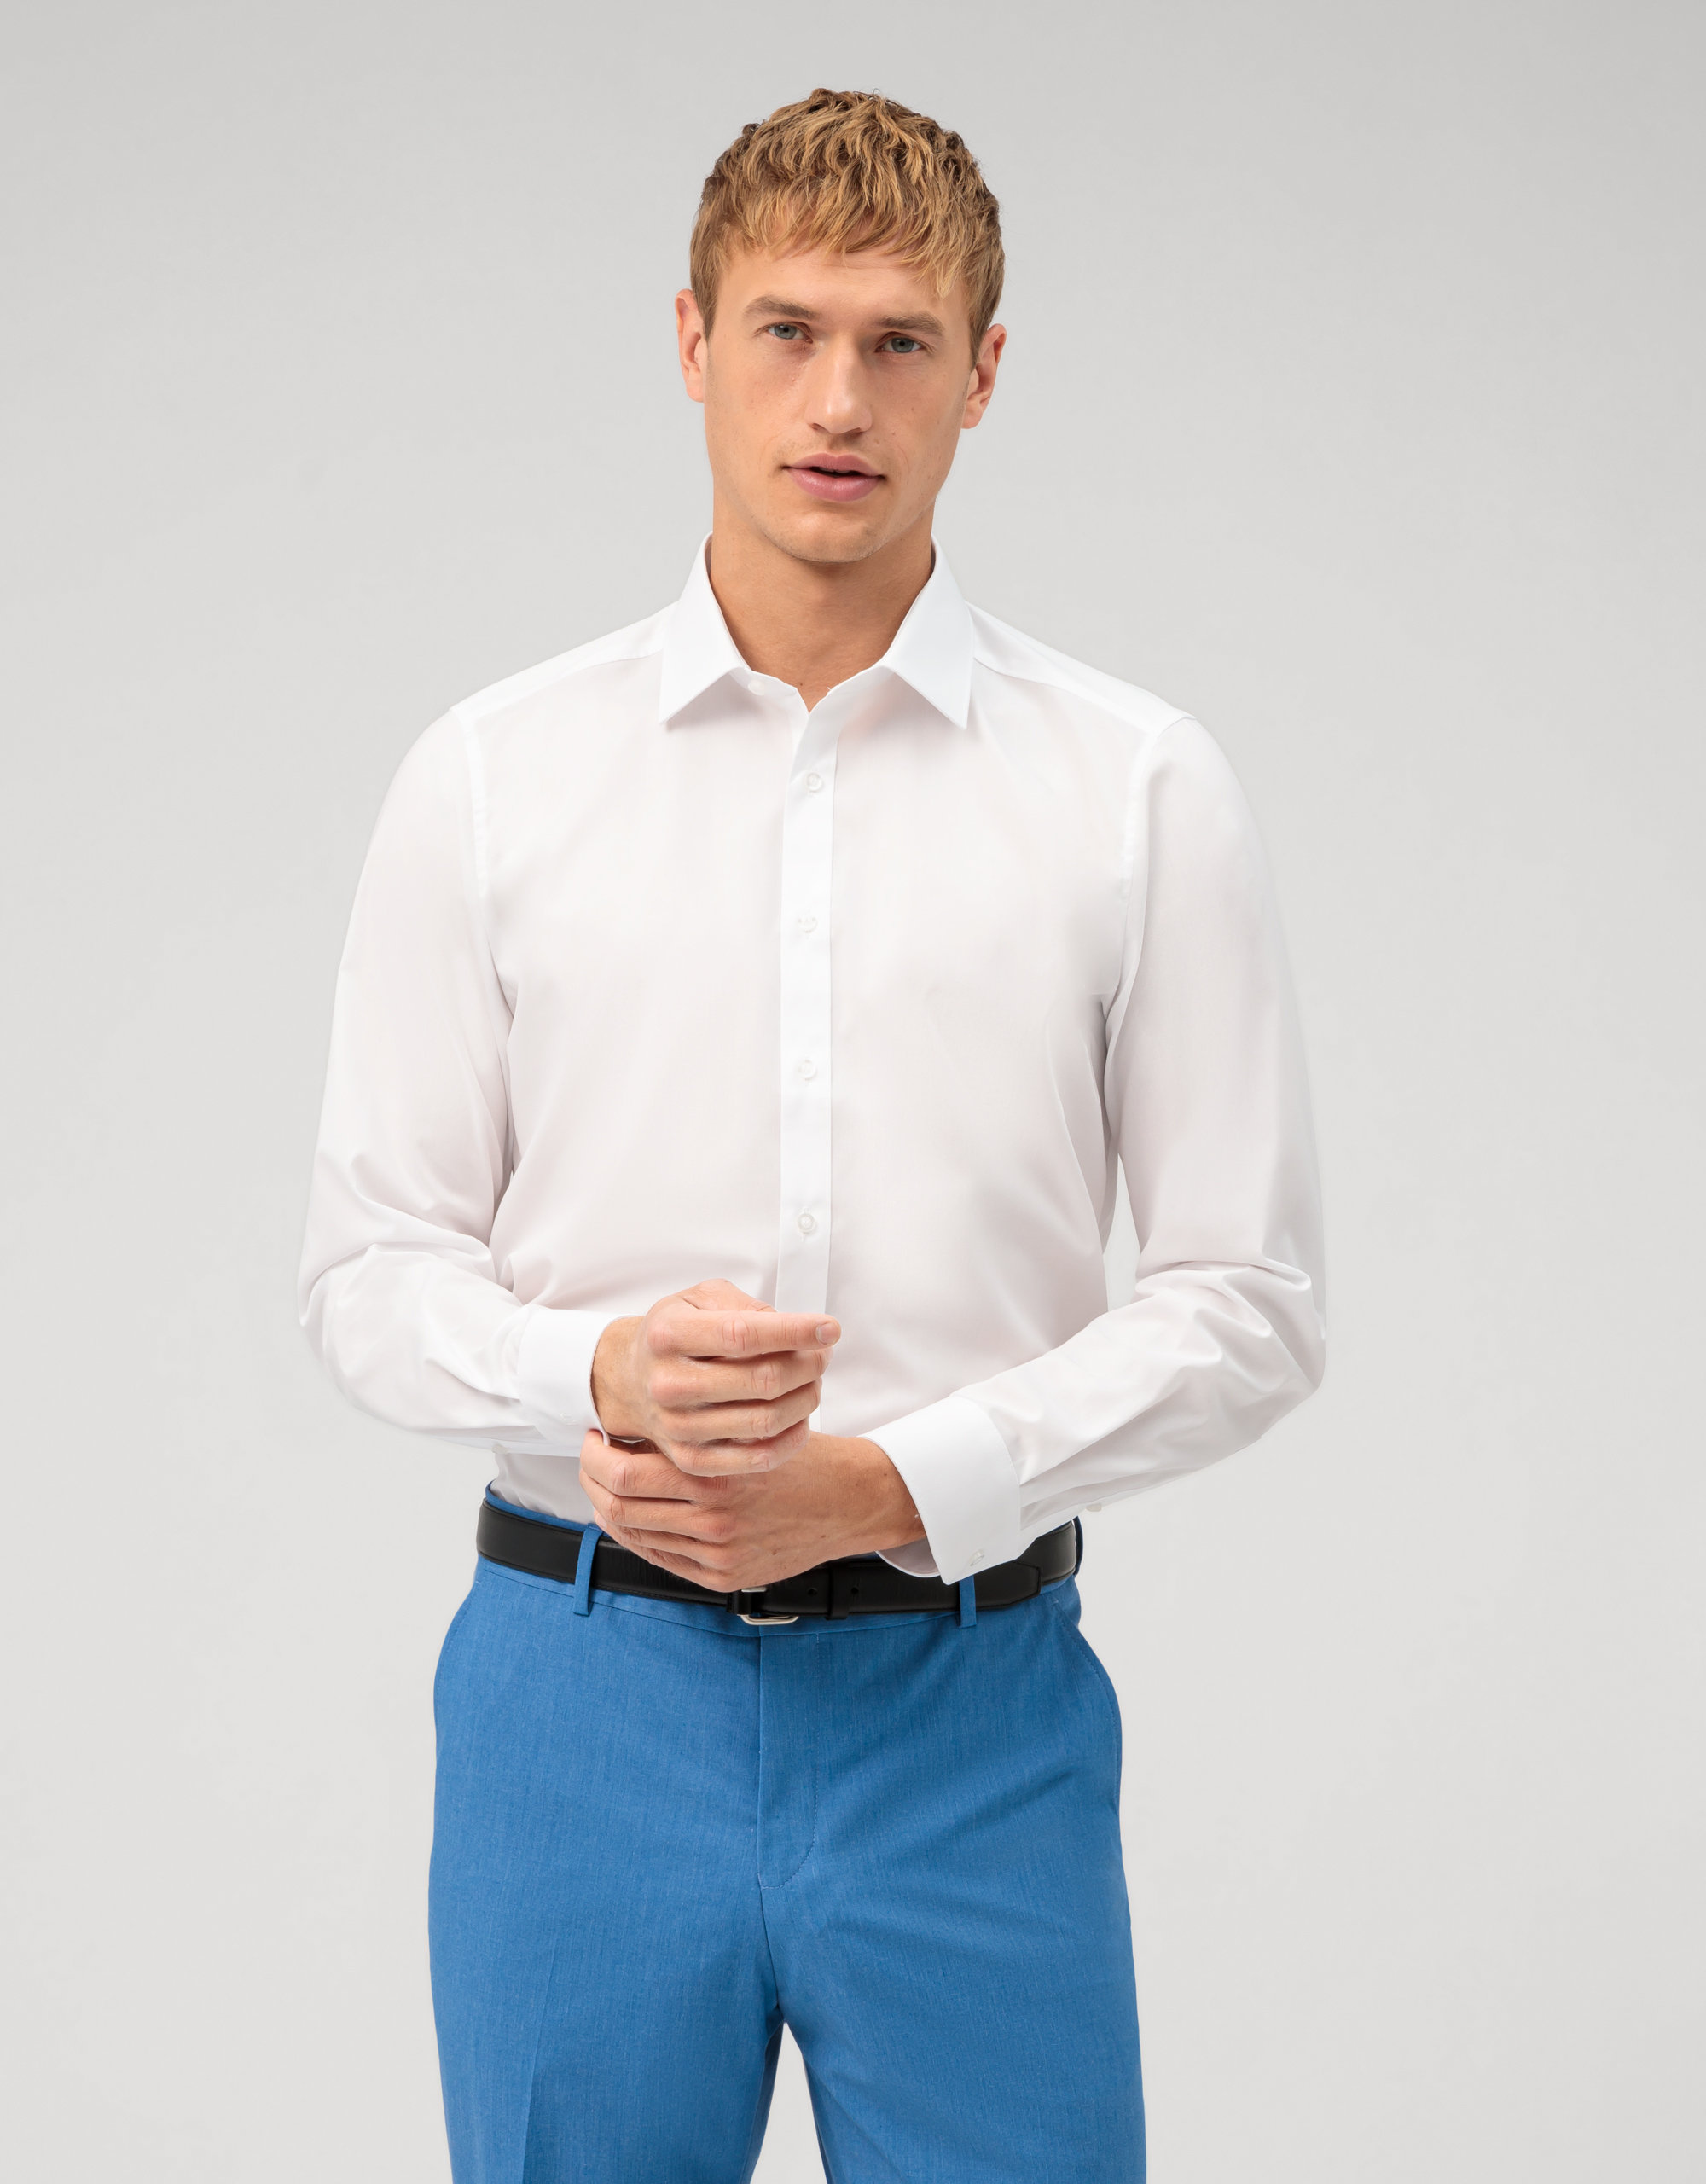 Business shirt | Kent New Level York fit, OLYMP 60906400 body - | White Five